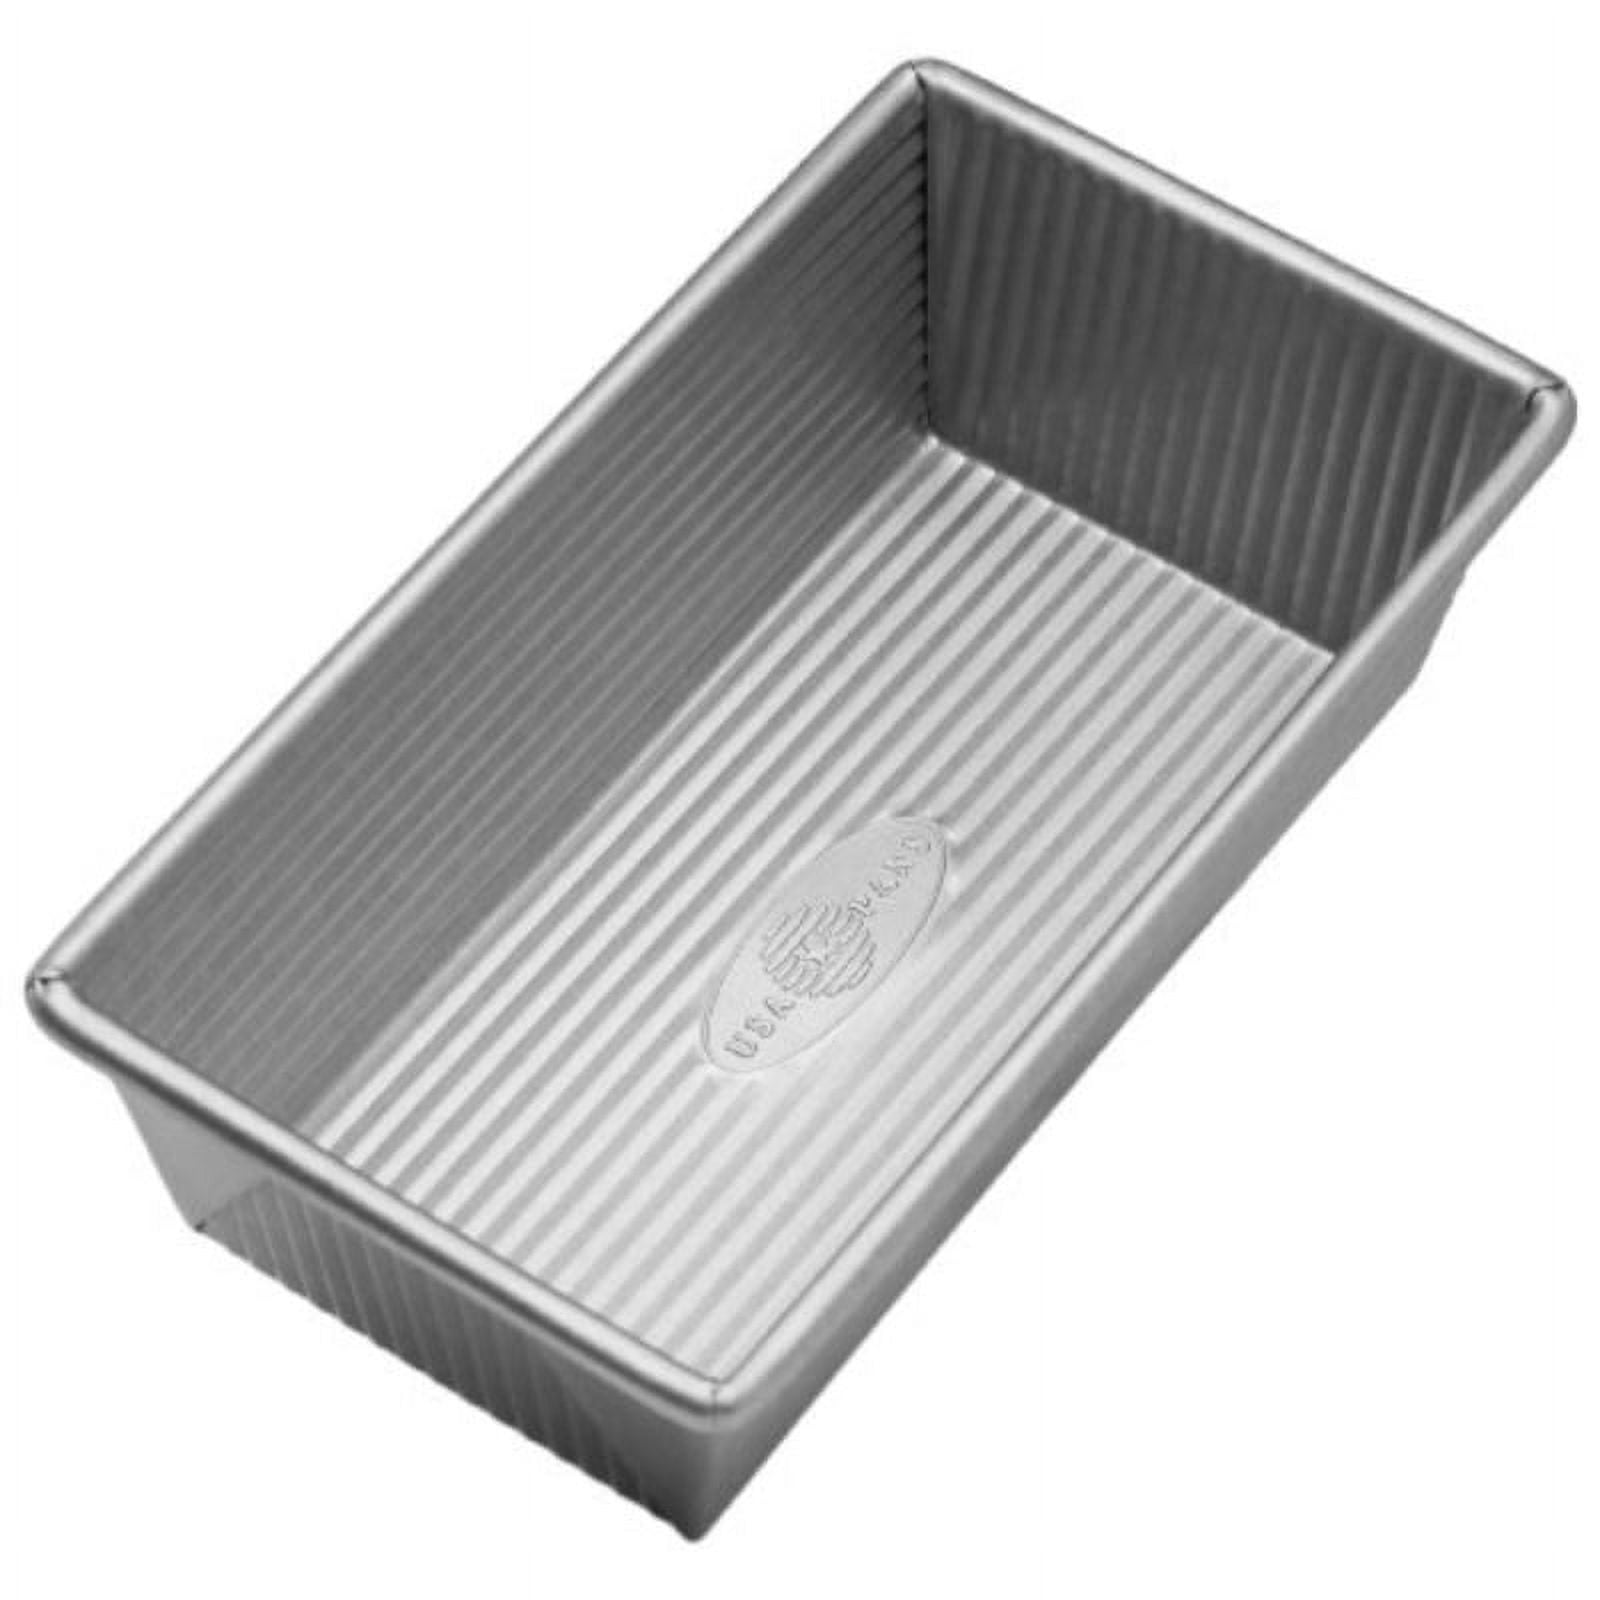 Small Optima Paper Loaf Pan - The Peppermill